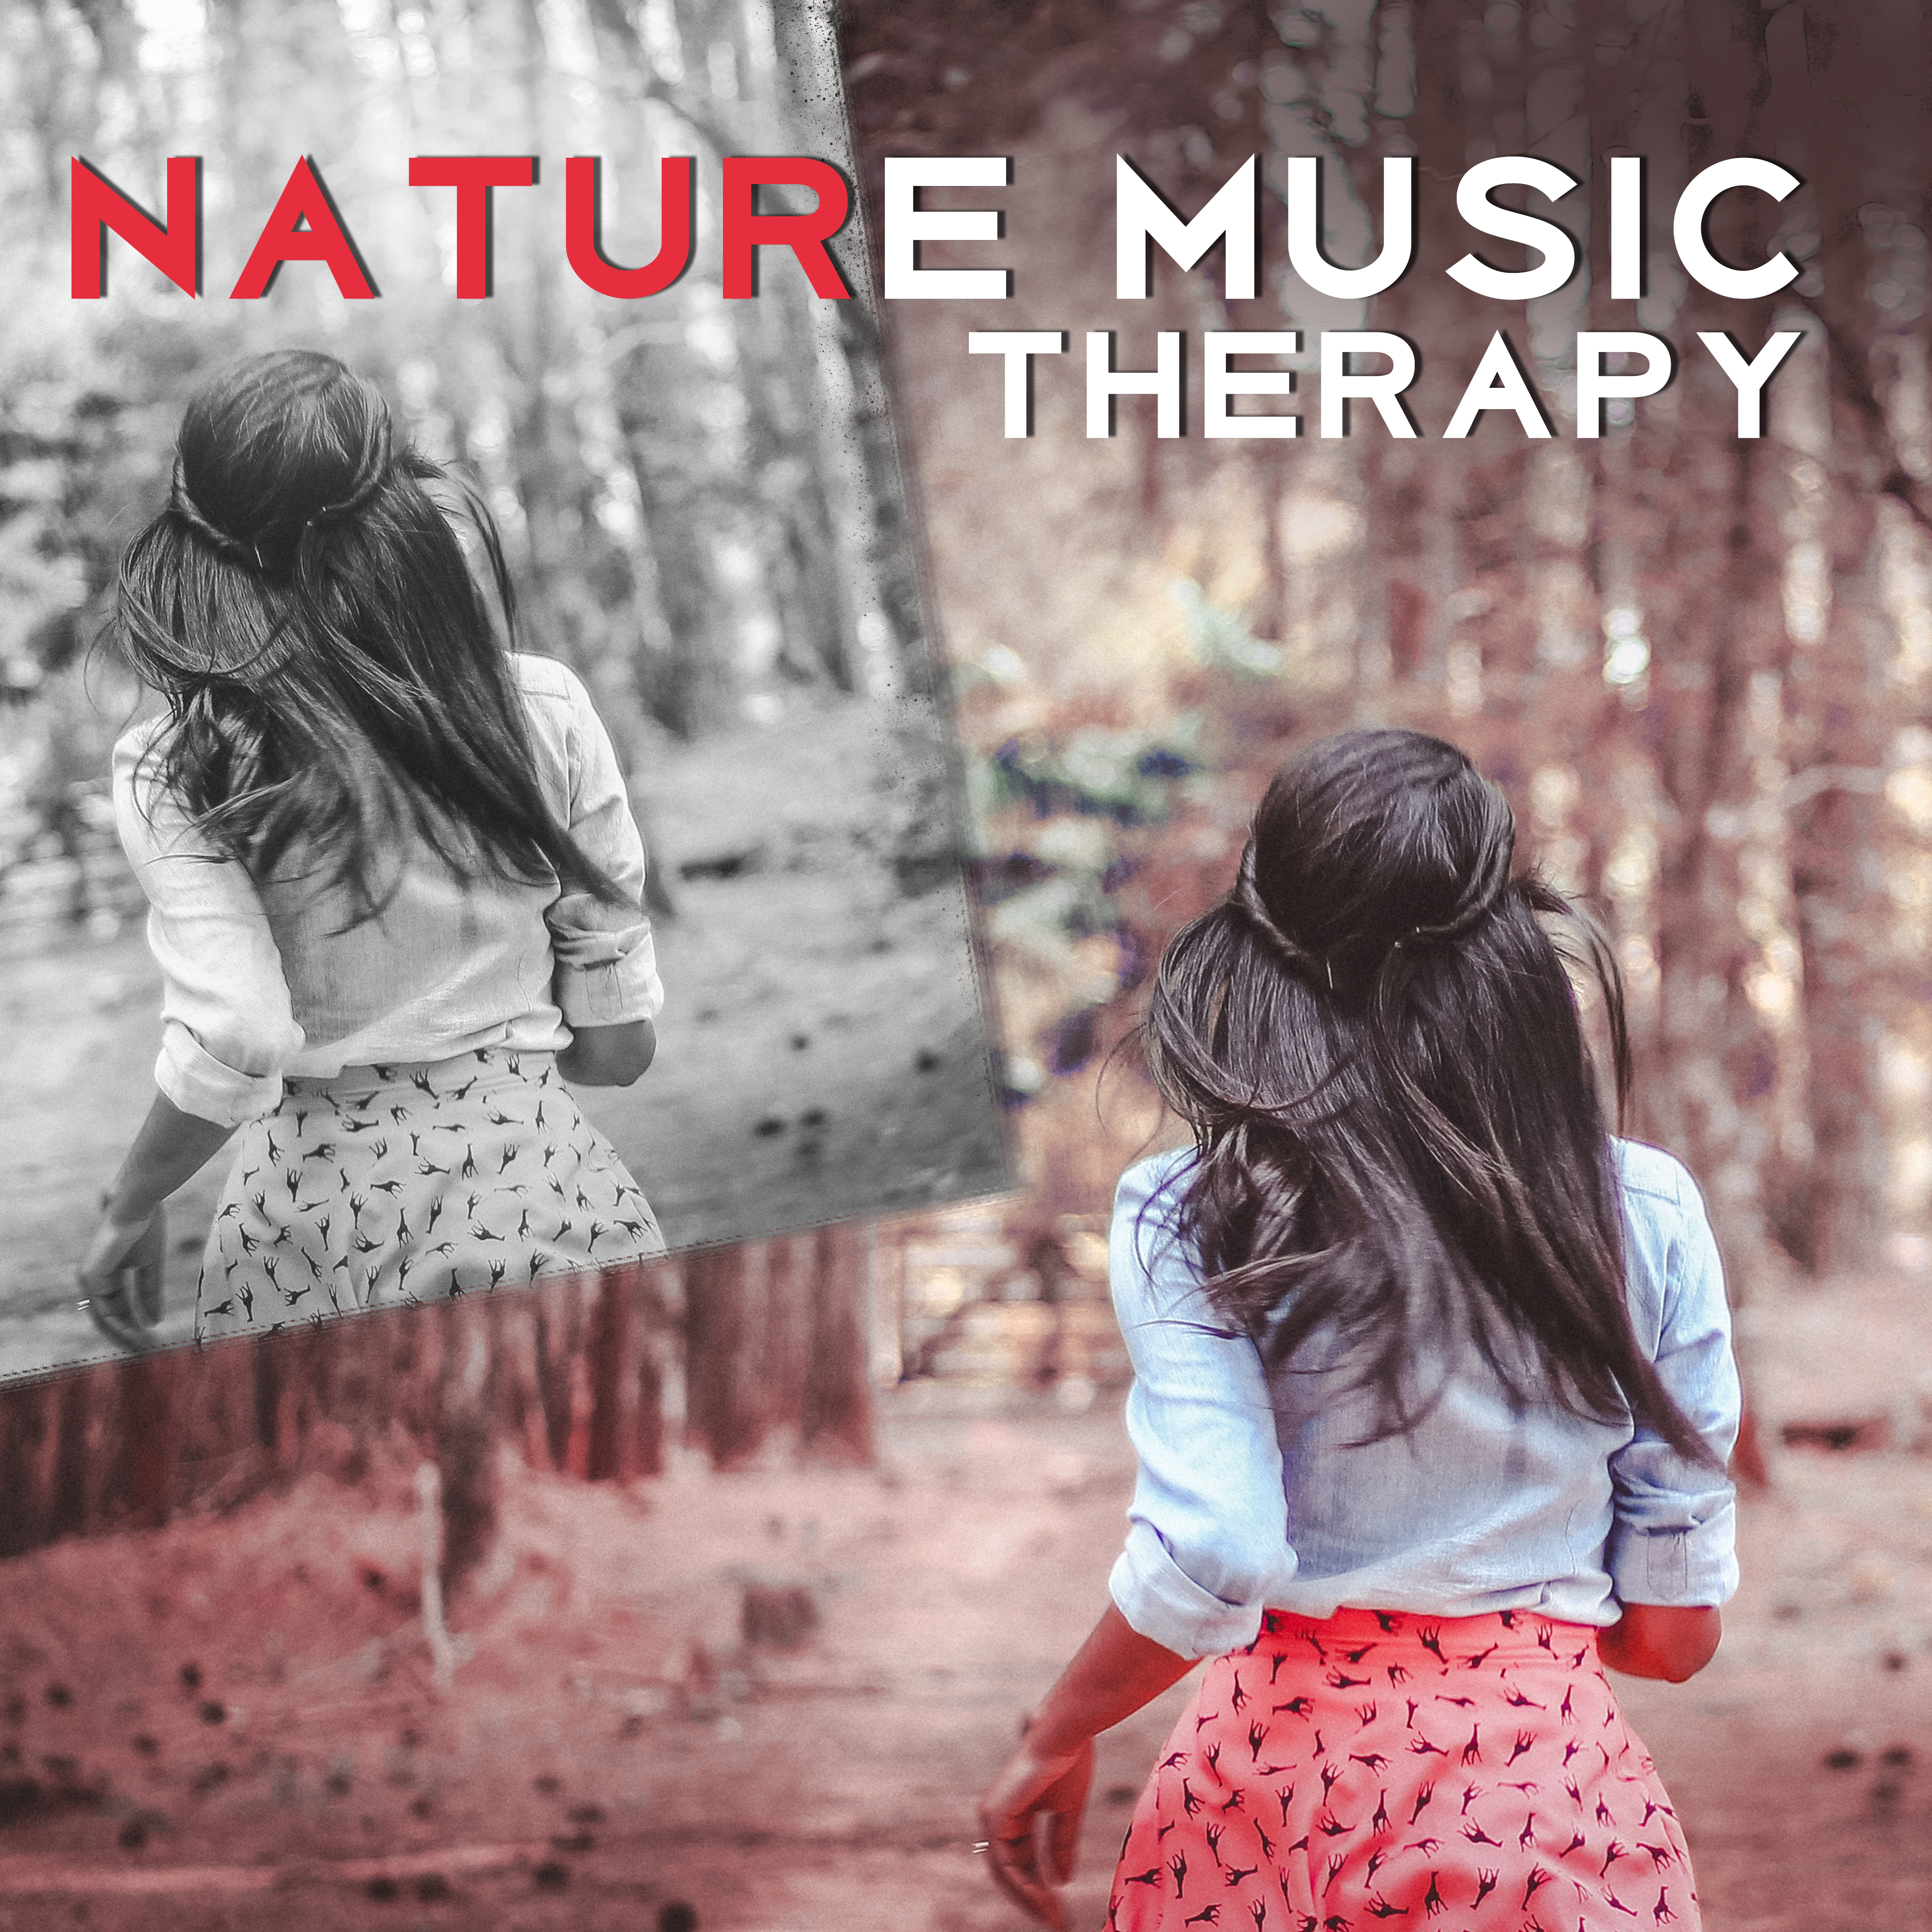 Nature Music Therapy – Peaceful Music for Relaxation, New Age, Relaxing Music, Feel Inner Calmness